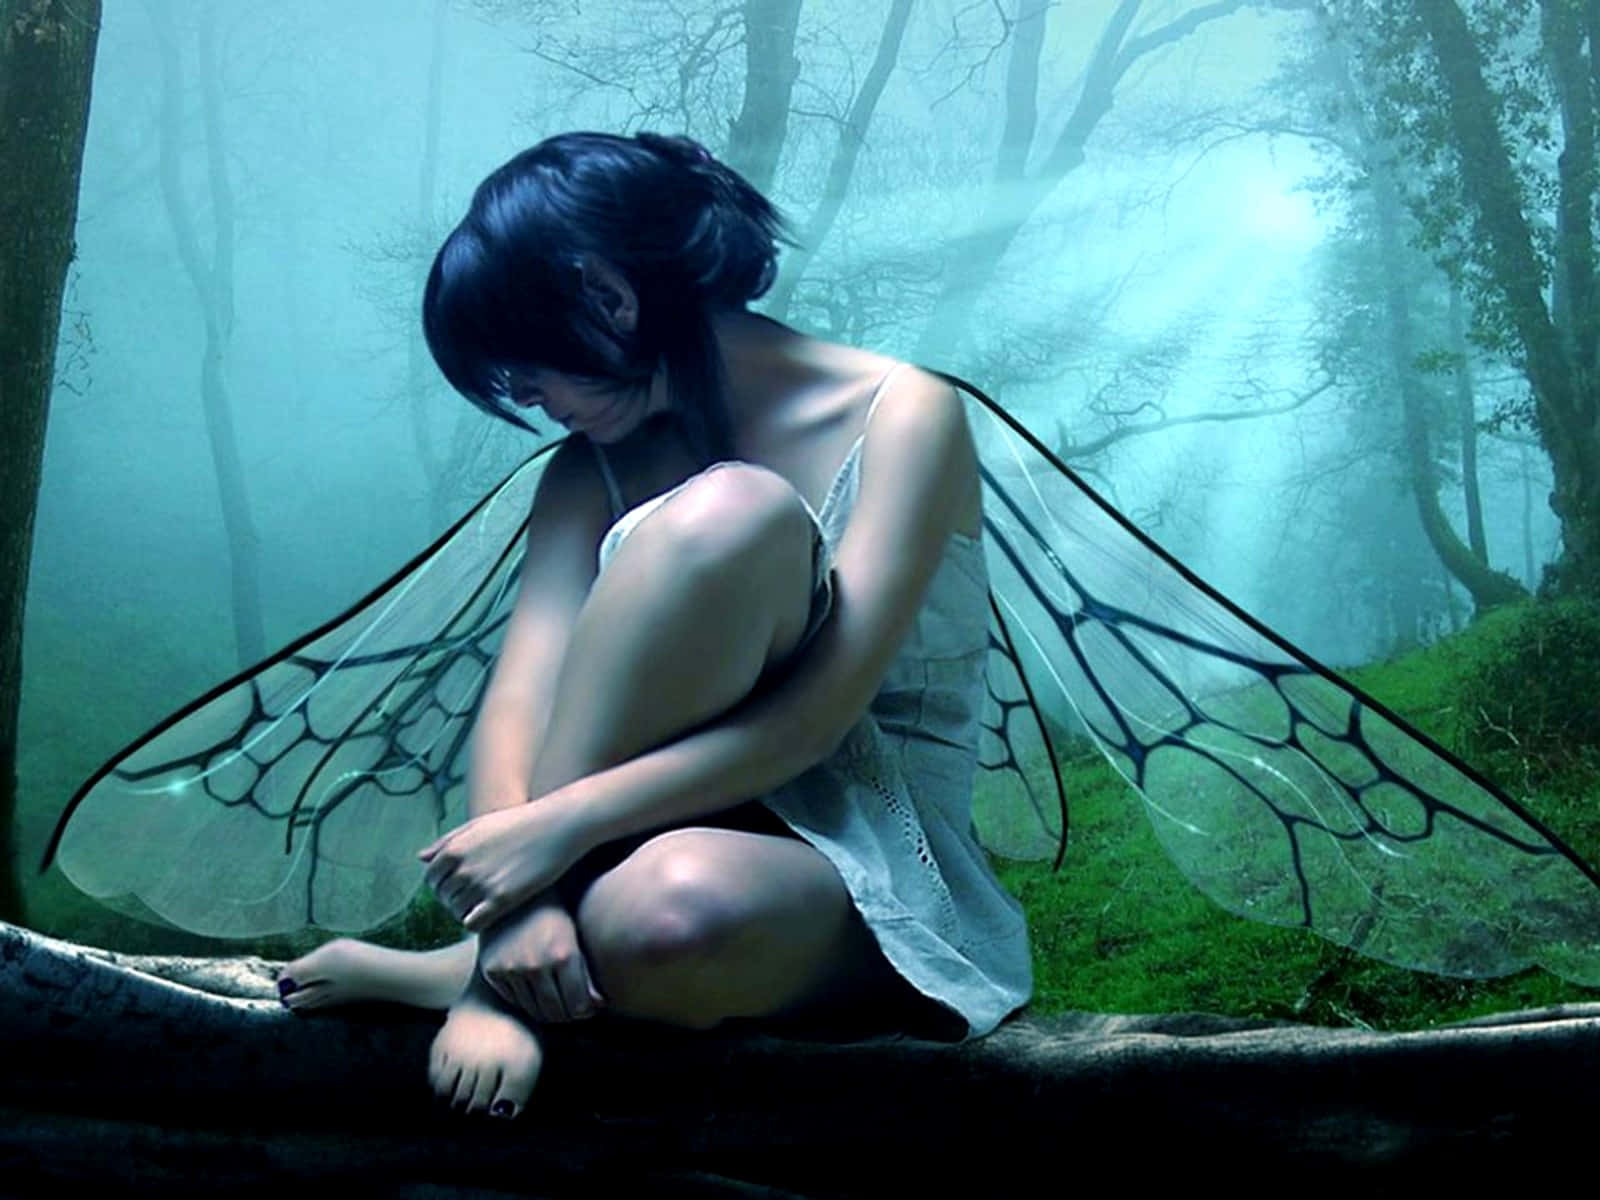 crying fairy wallpaper